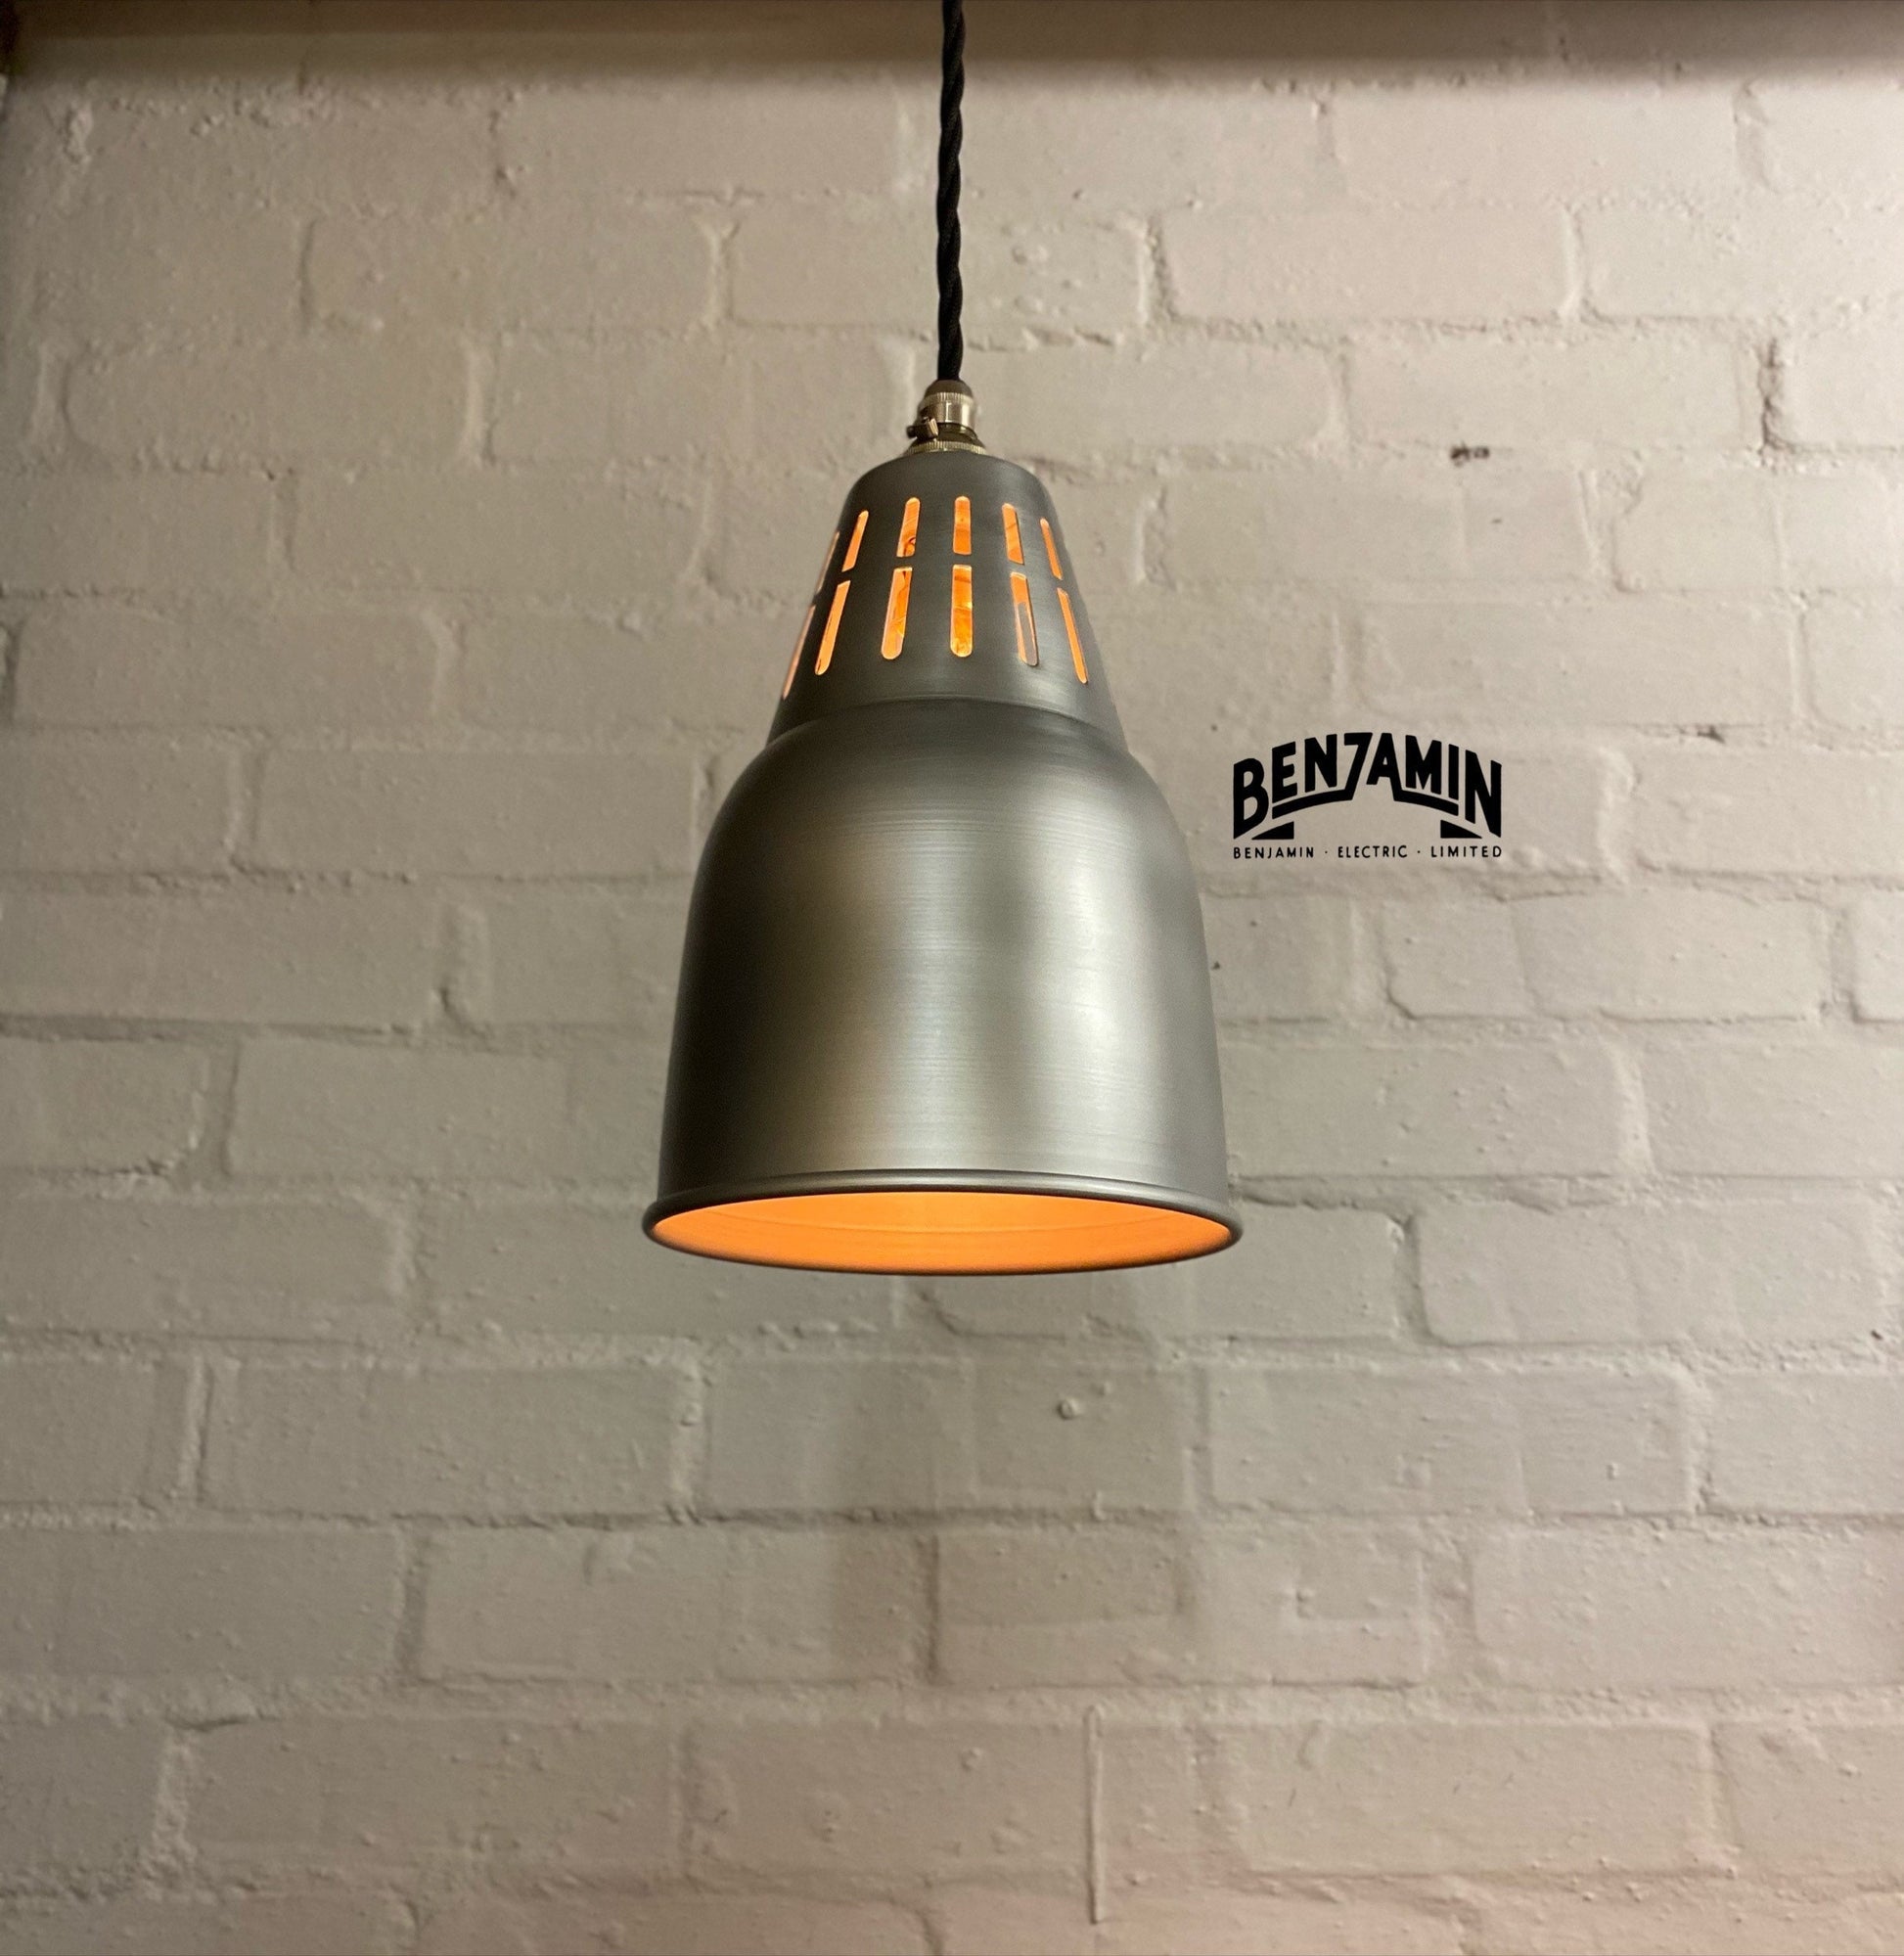 Coltishall ~ 3 x Galvanised Silver Shades Design Pendant Set Track Light | Ceiling Dining Room | Kitchen Table | Vintage Industrial